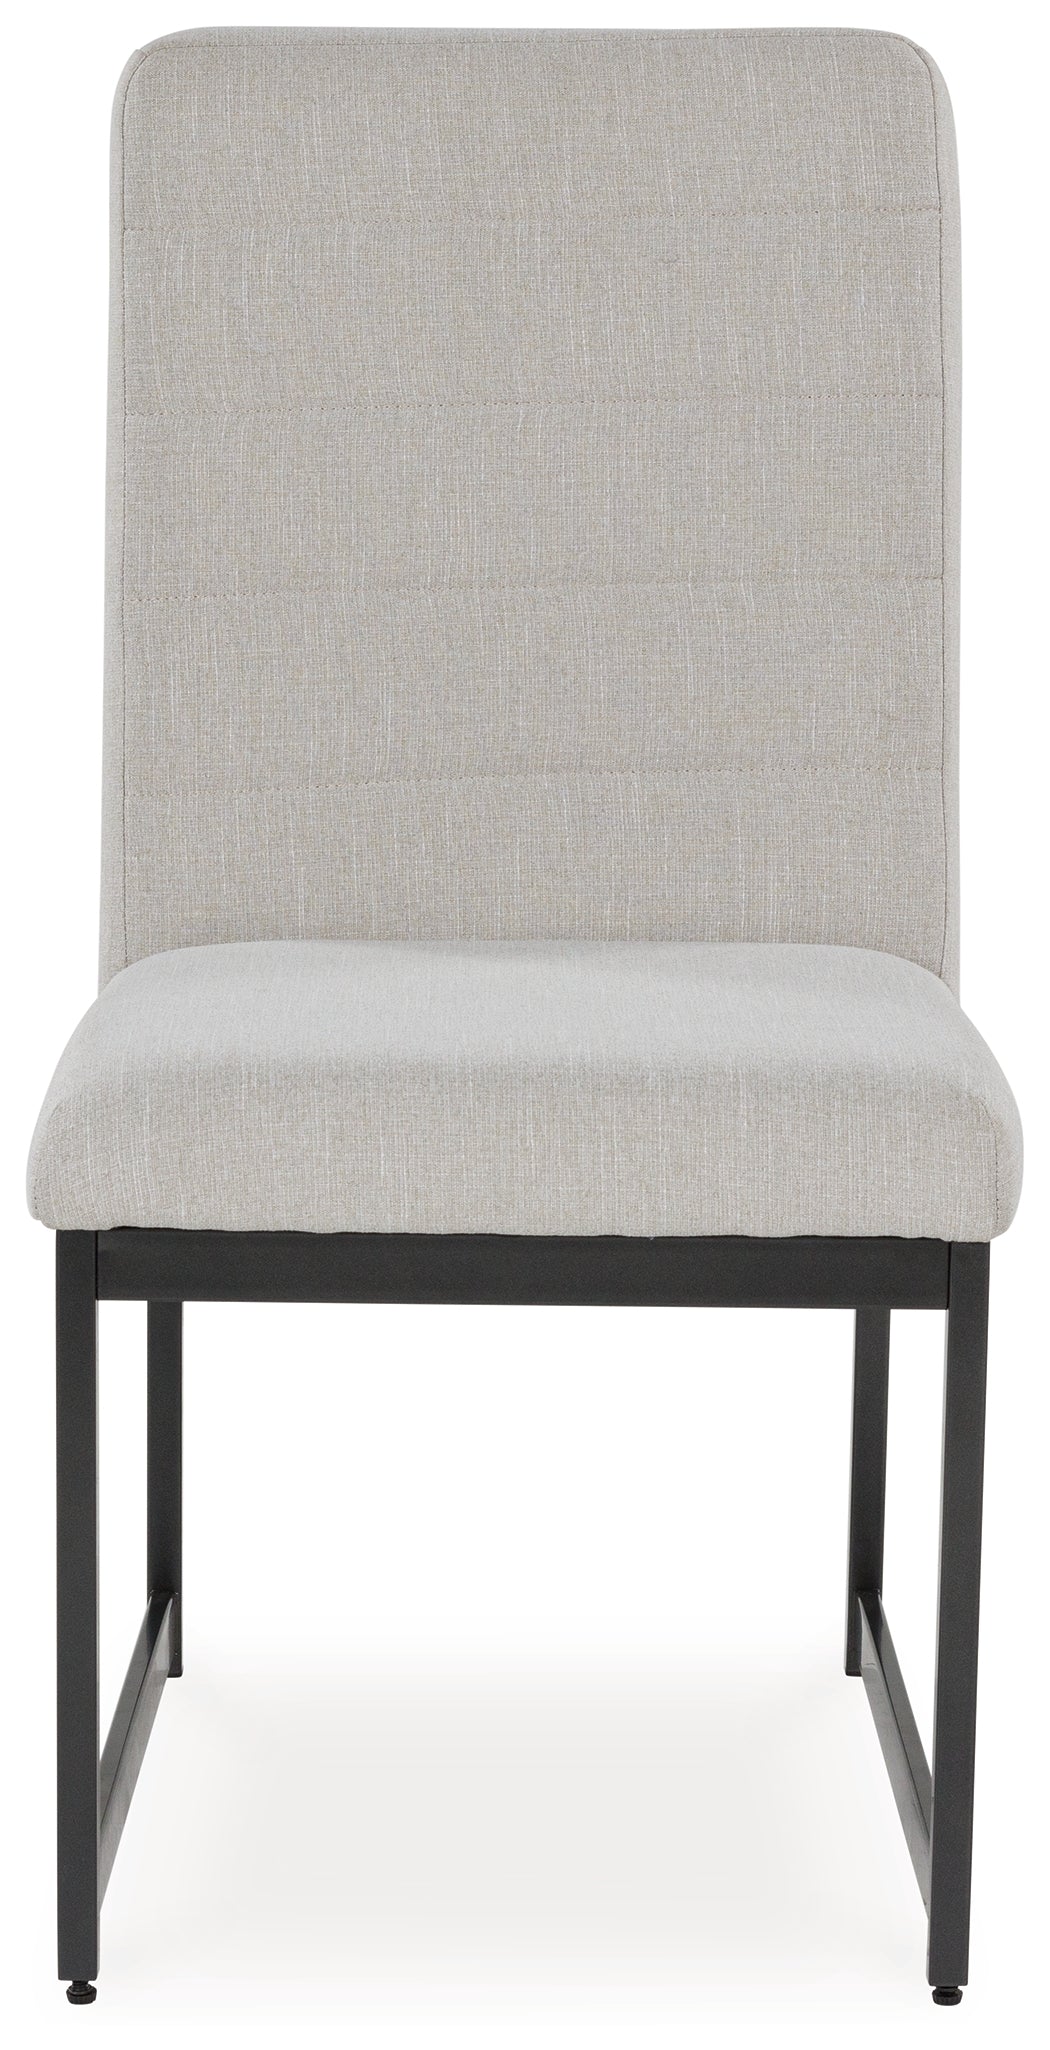 Tomtyn Dining Chair